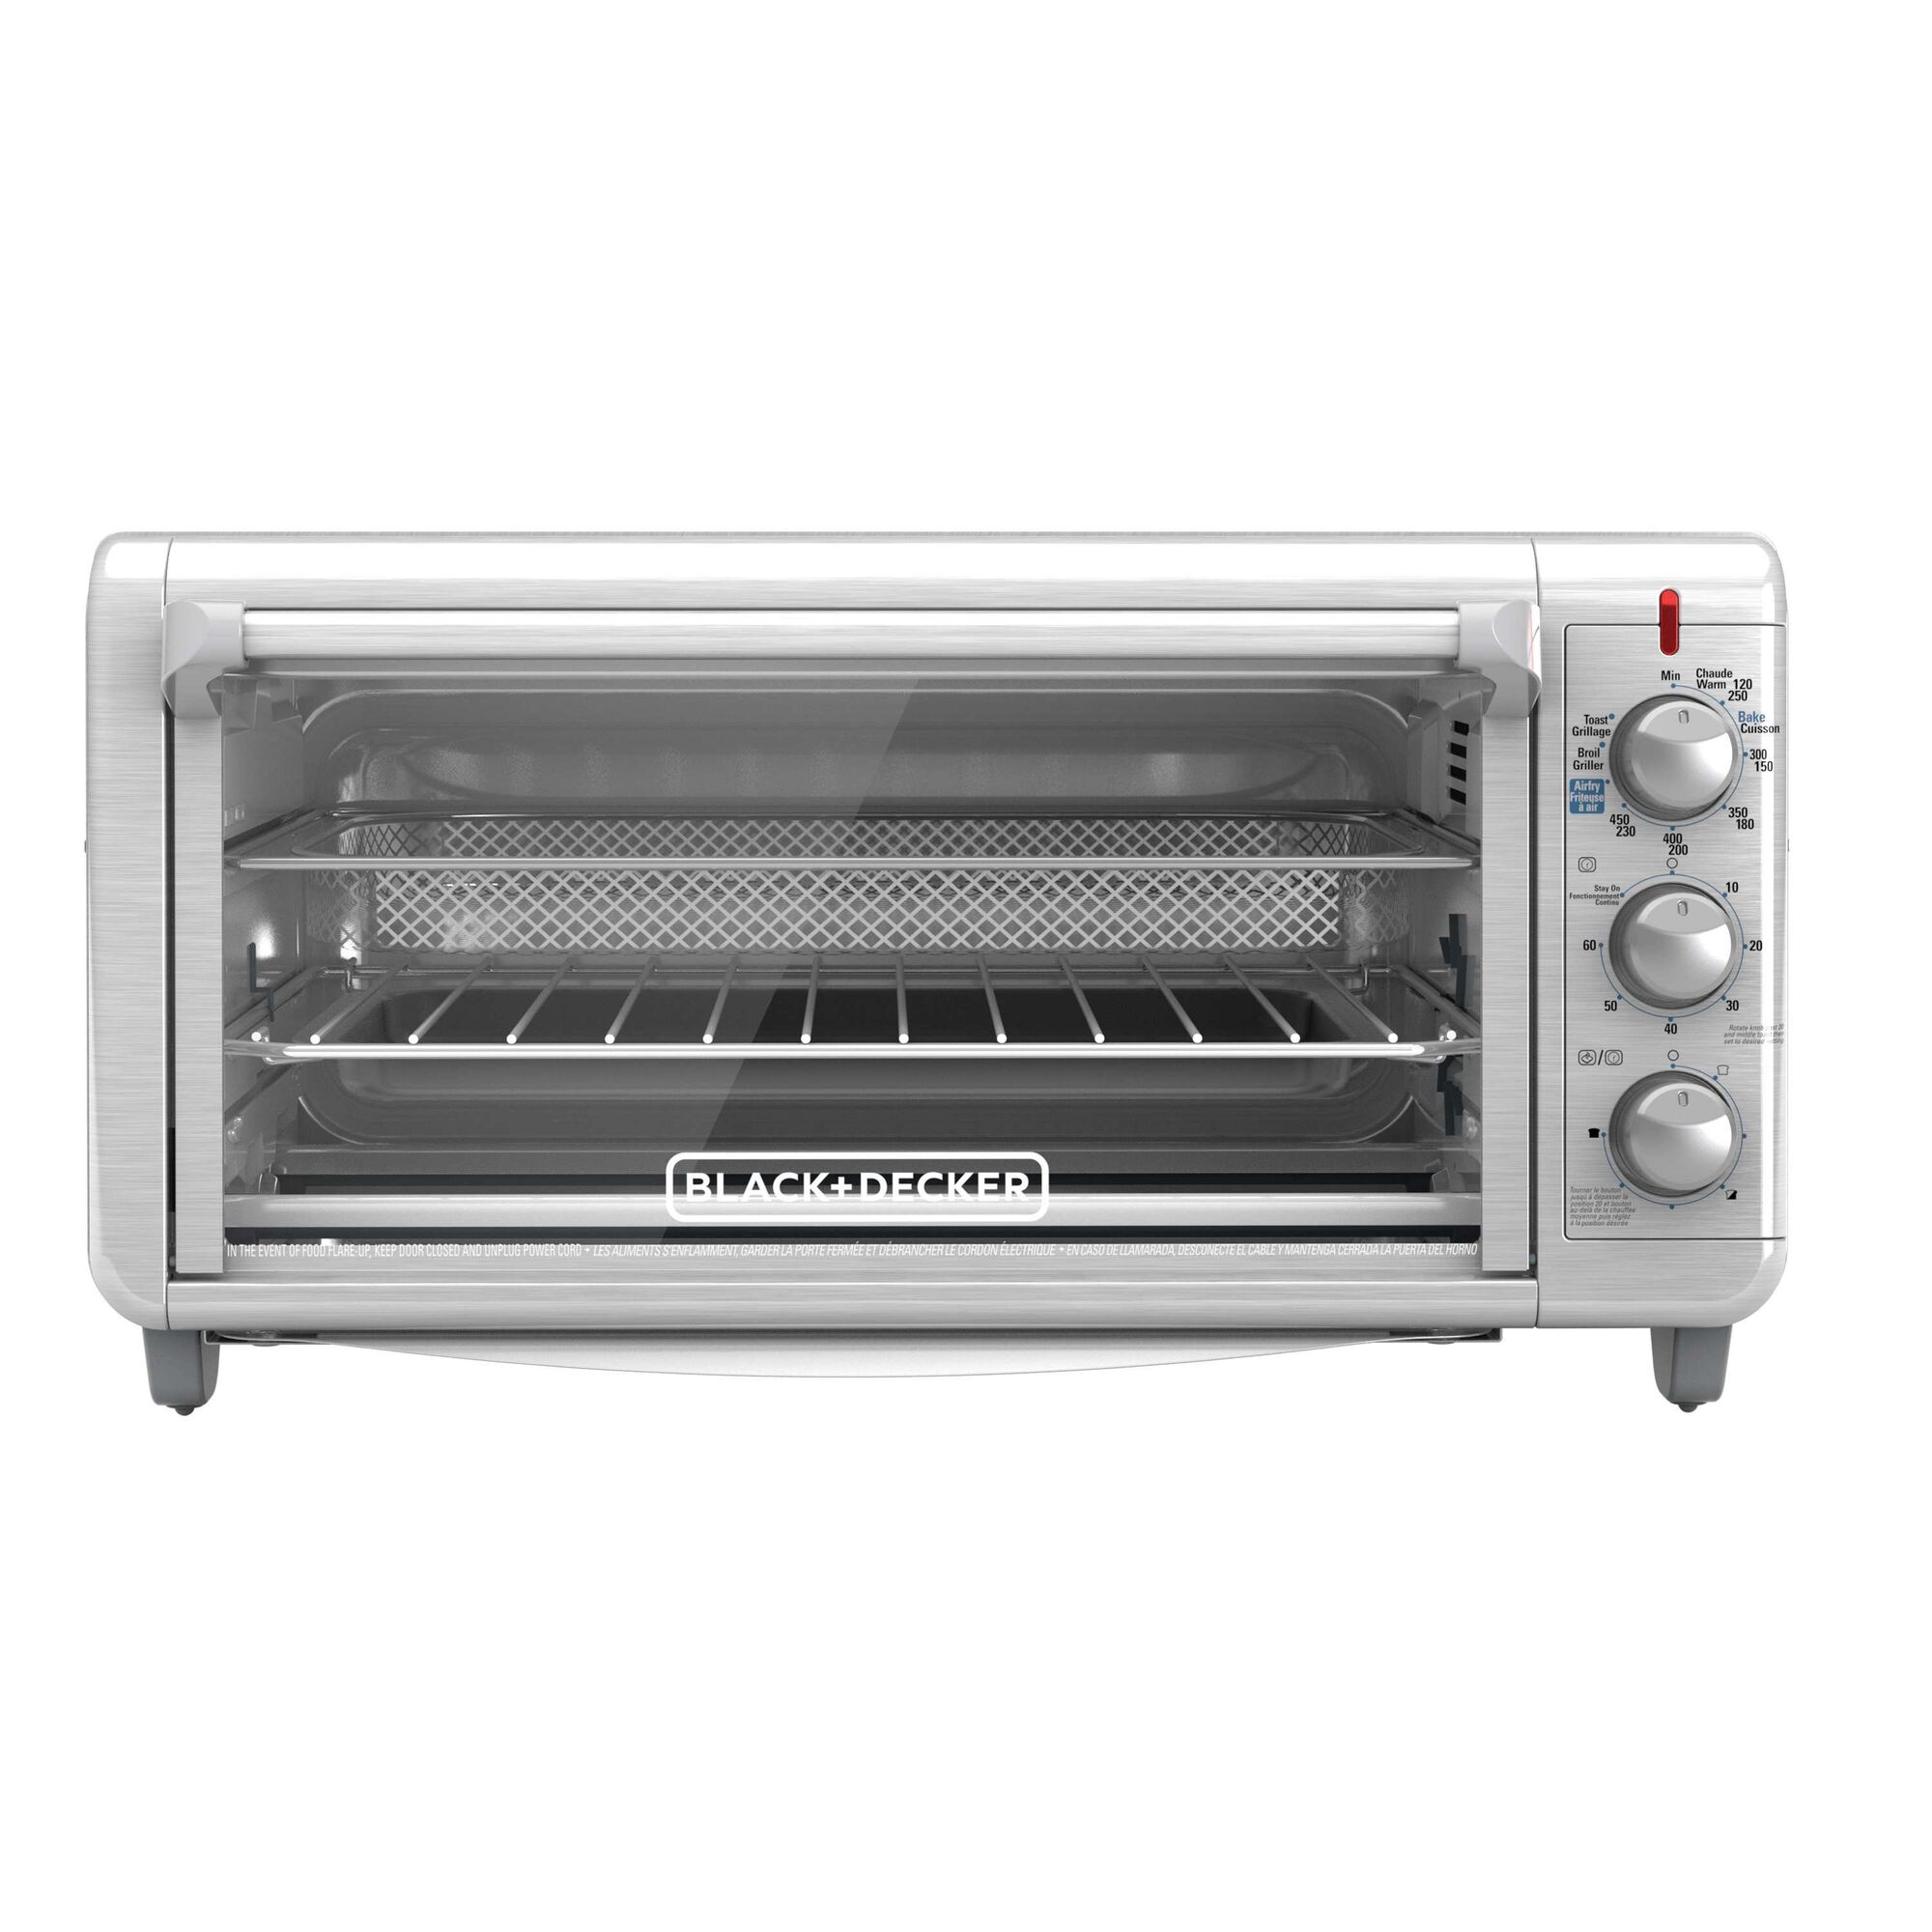 Extra Wide Crisp AND Bake Air Fry Toaster Oven.